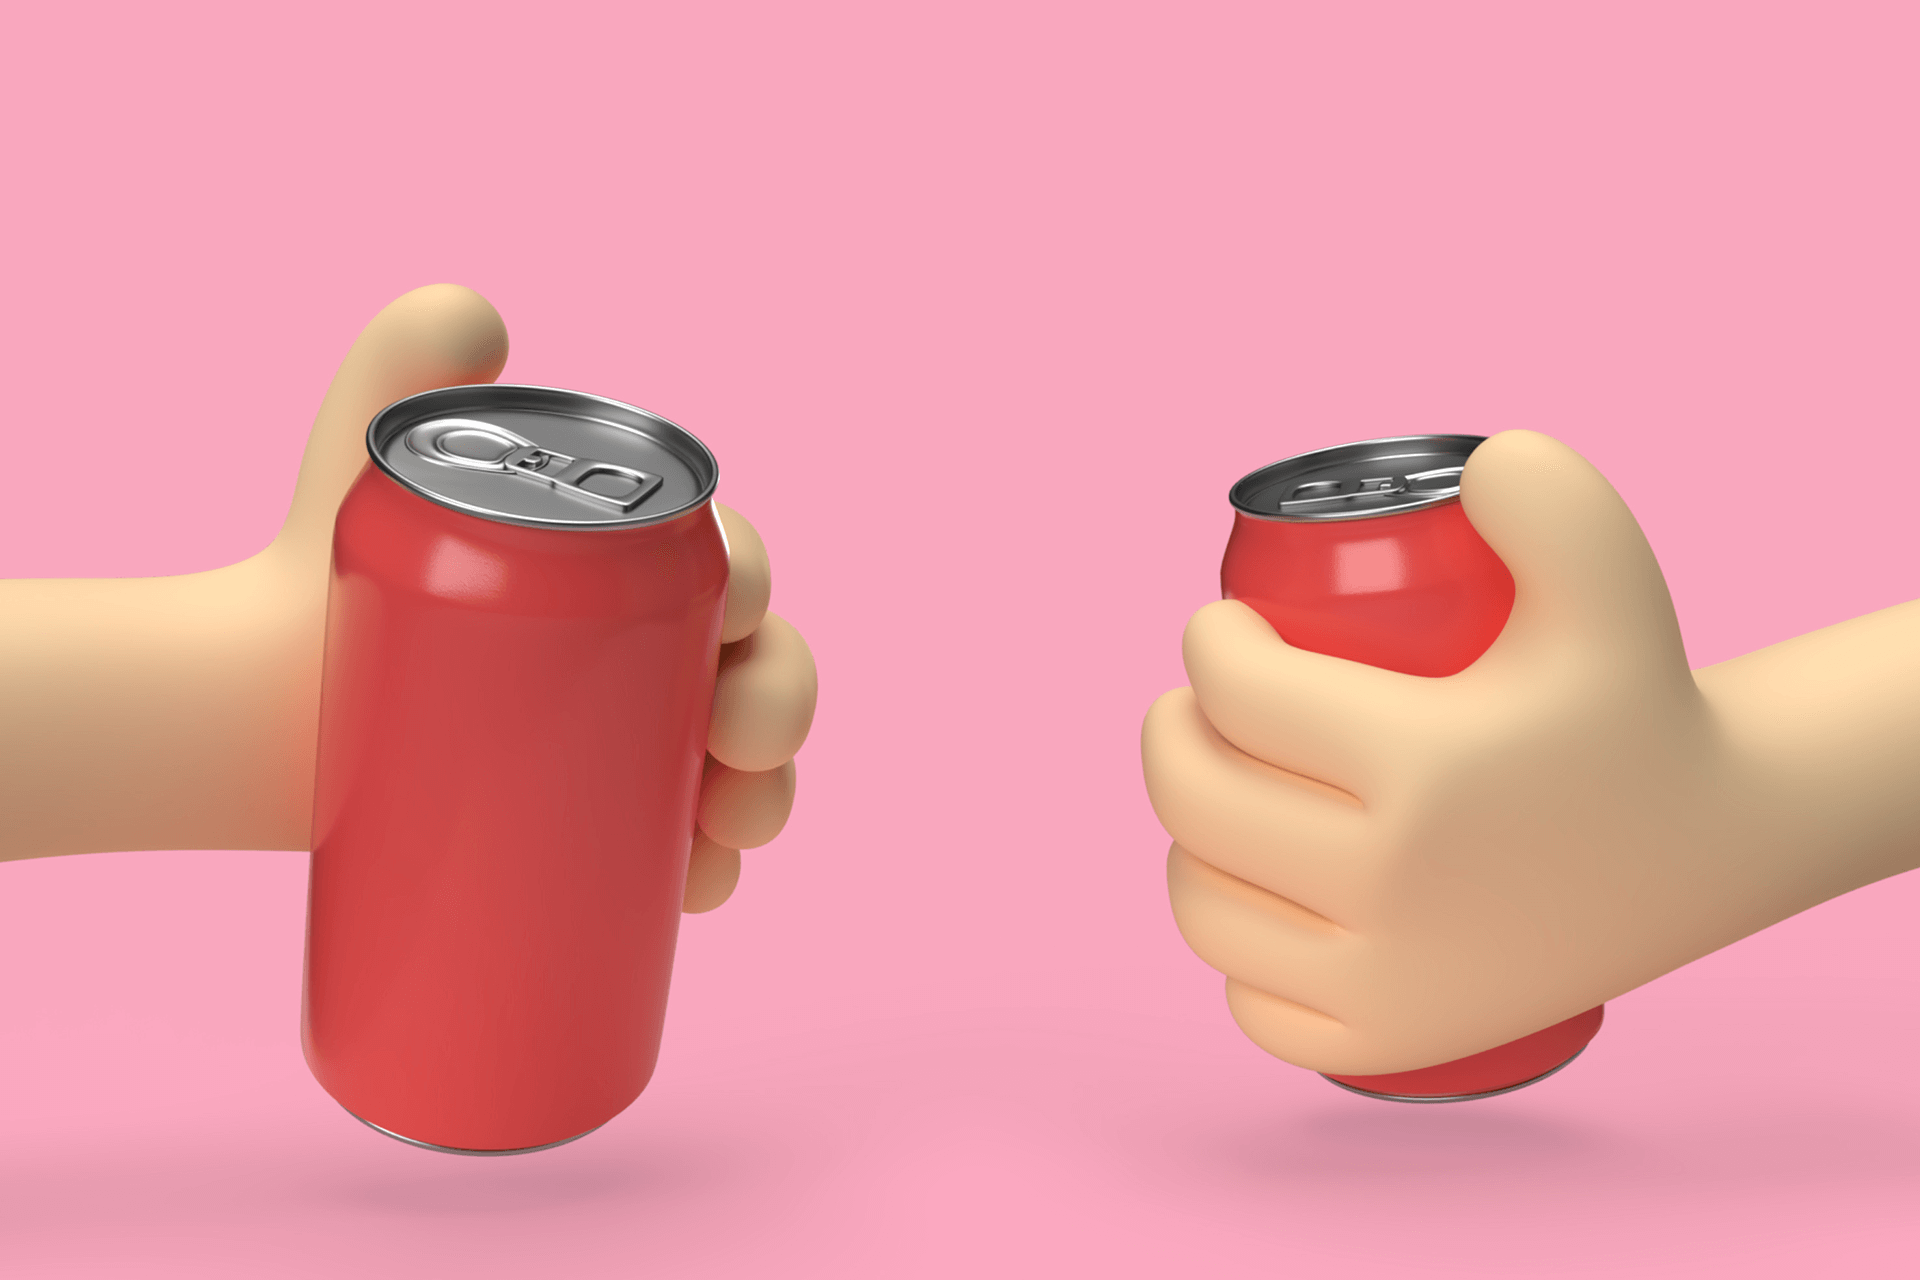 3D illustration of two hands holding coke cans